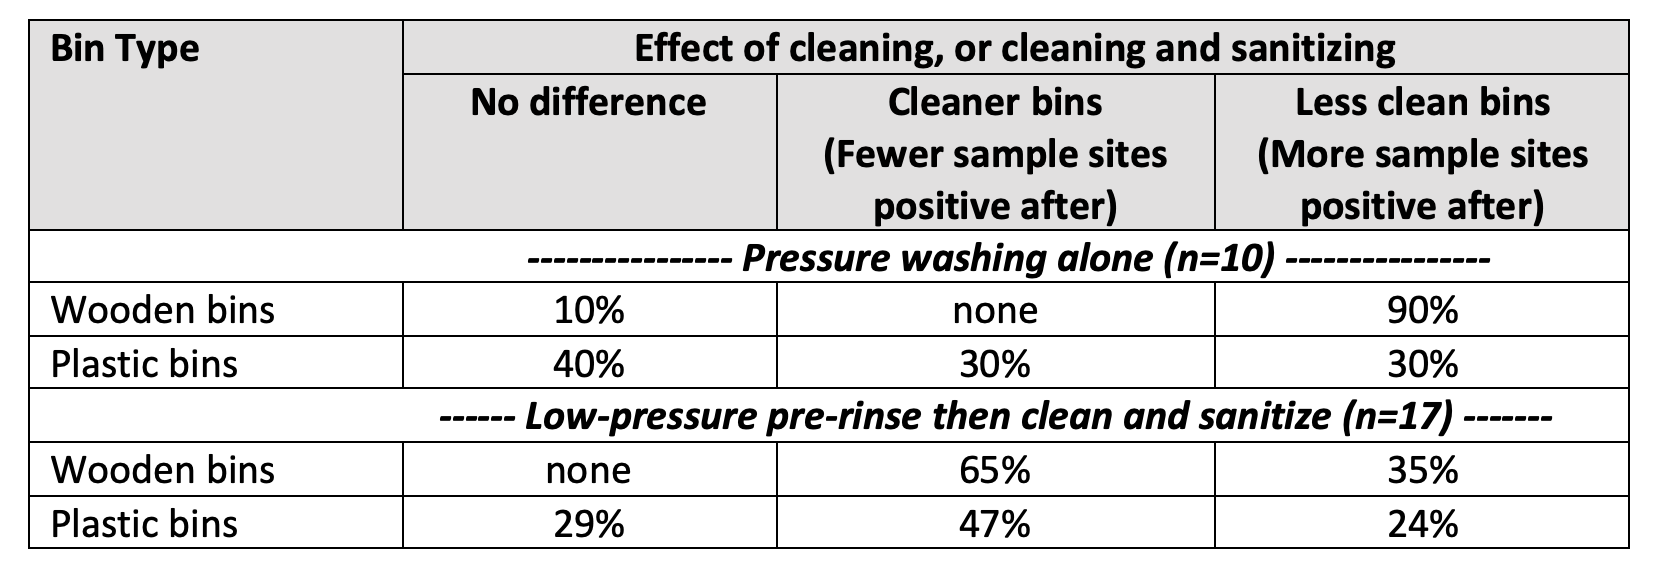 Chart showing the effect of cleaning or cleaning and sanitizing on different bin types